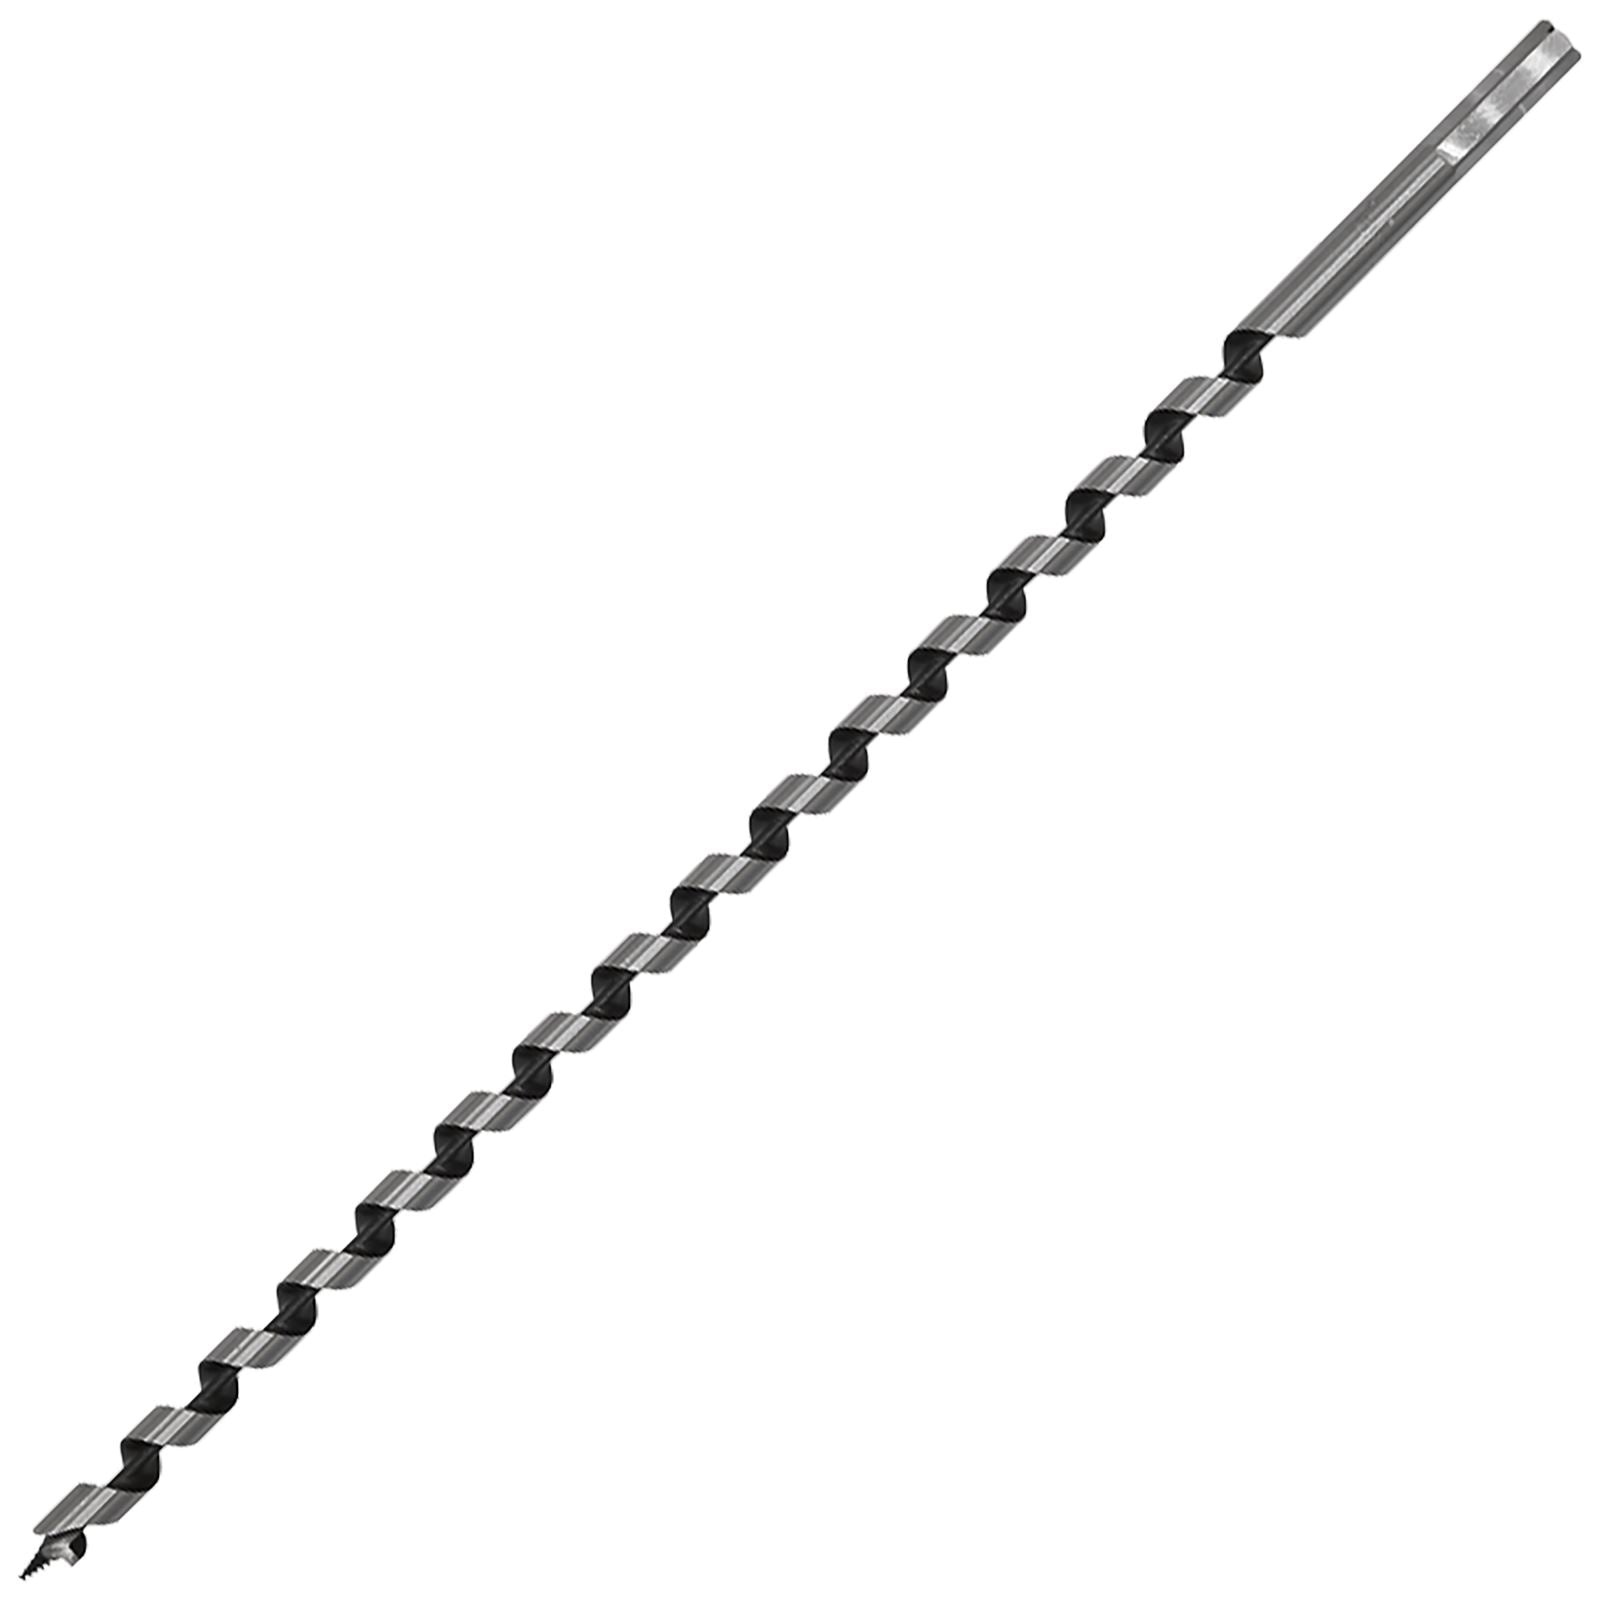 Worksafe by Sealey Auger Wood Drill Bit 12mm x 460mm